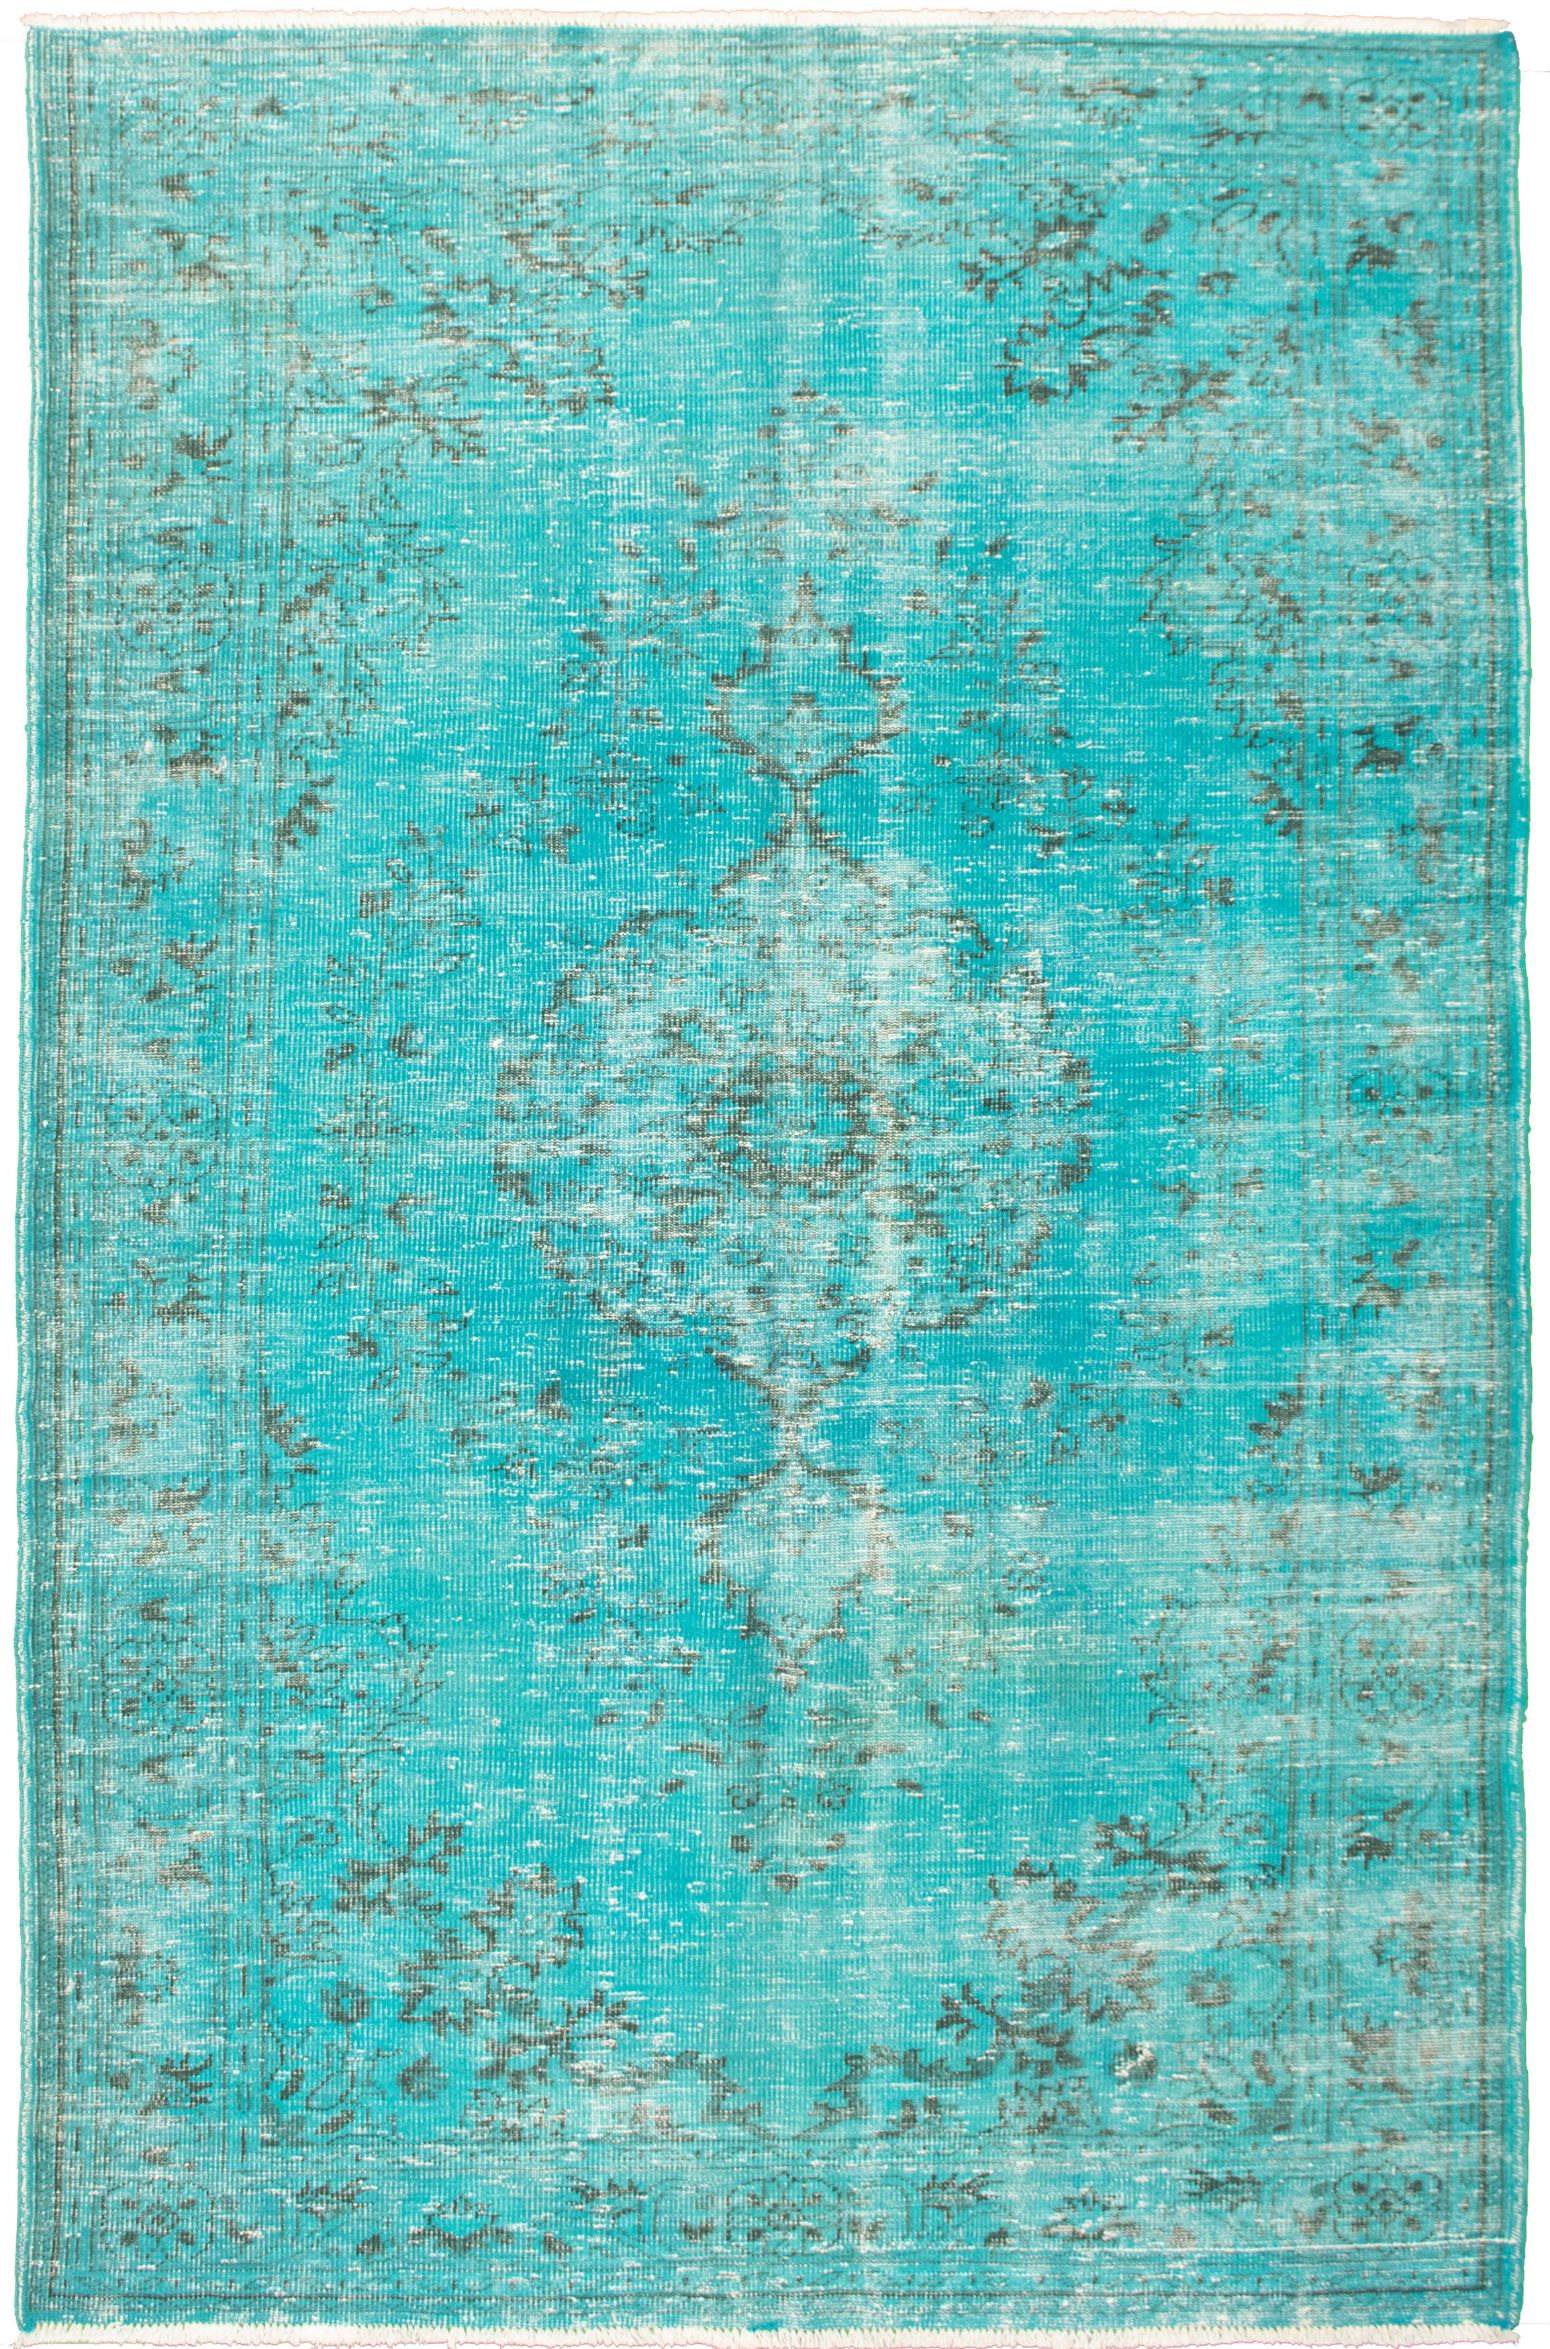 Hand-knotted Color Transition Turquoise Wool Rug 6'7" x 10'1" Size: 6'7" x 10'1"  